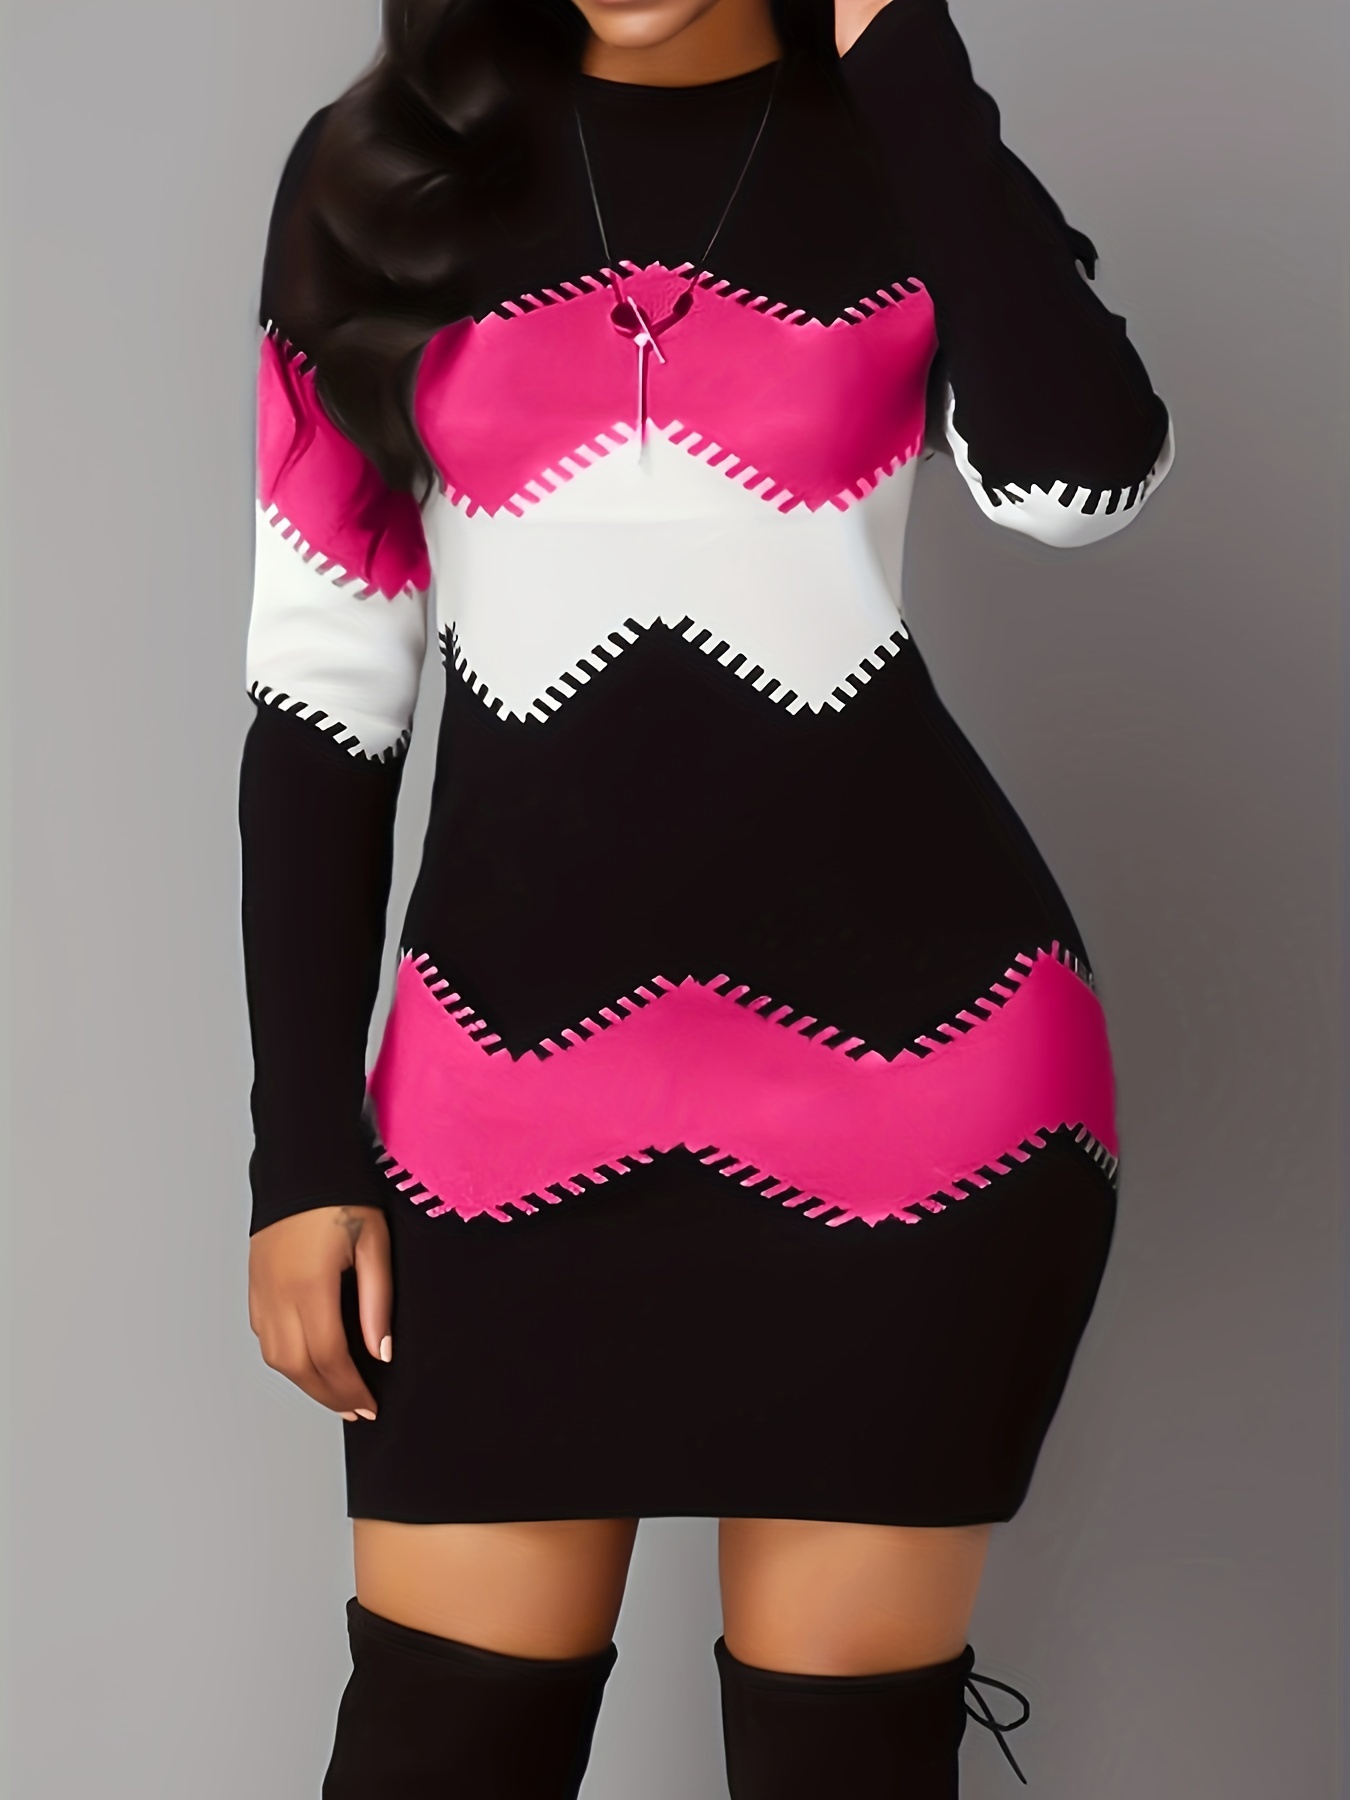 color block simple dress casual long sleeve bodycon mini dress womens clothing details 6